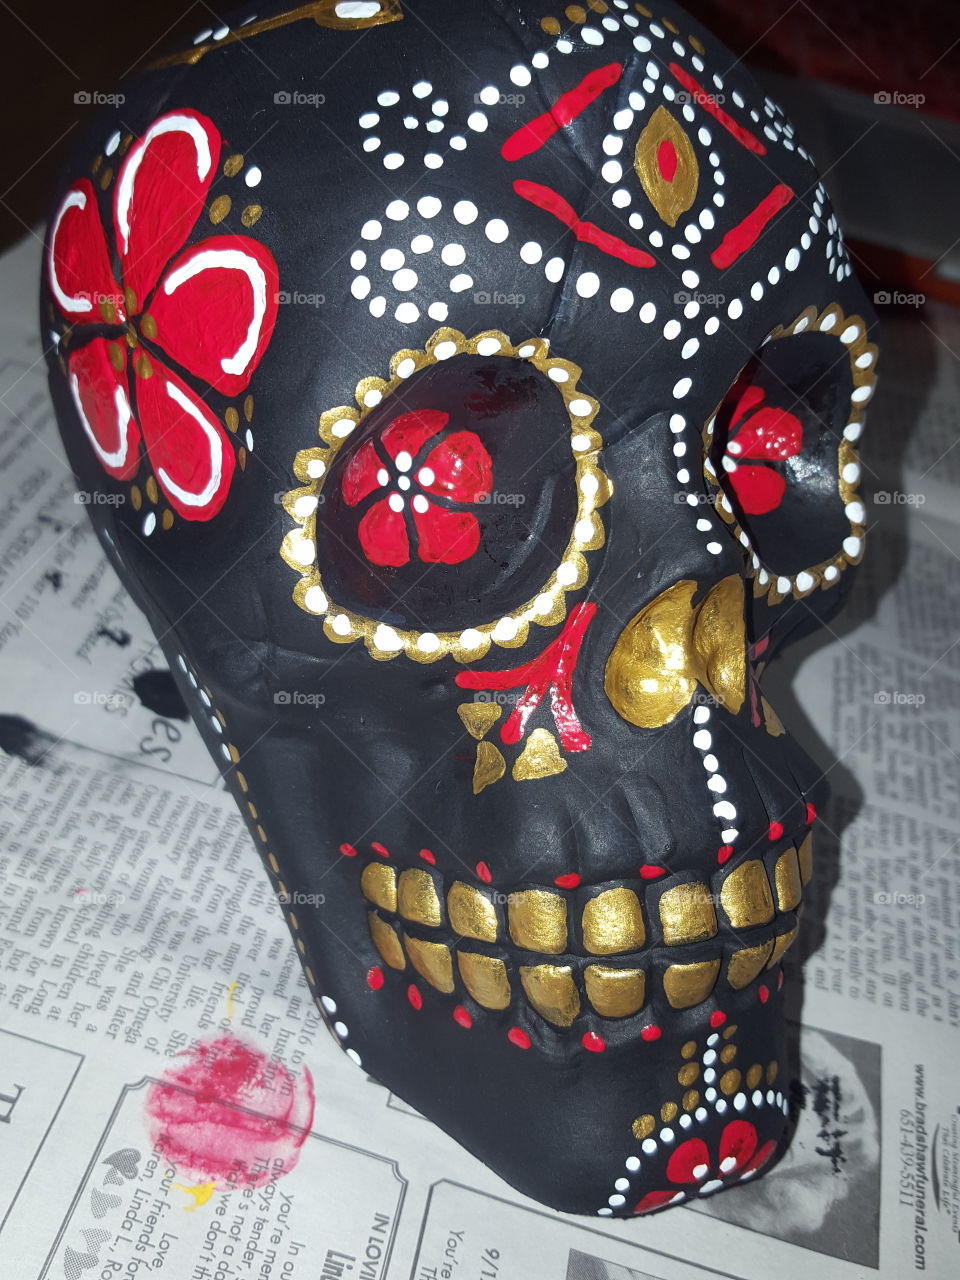 diy art projects. Decorating dollar store skulls with acrylic paint to make sugar skulls for Day of the Dead/Dia de Los Muertos